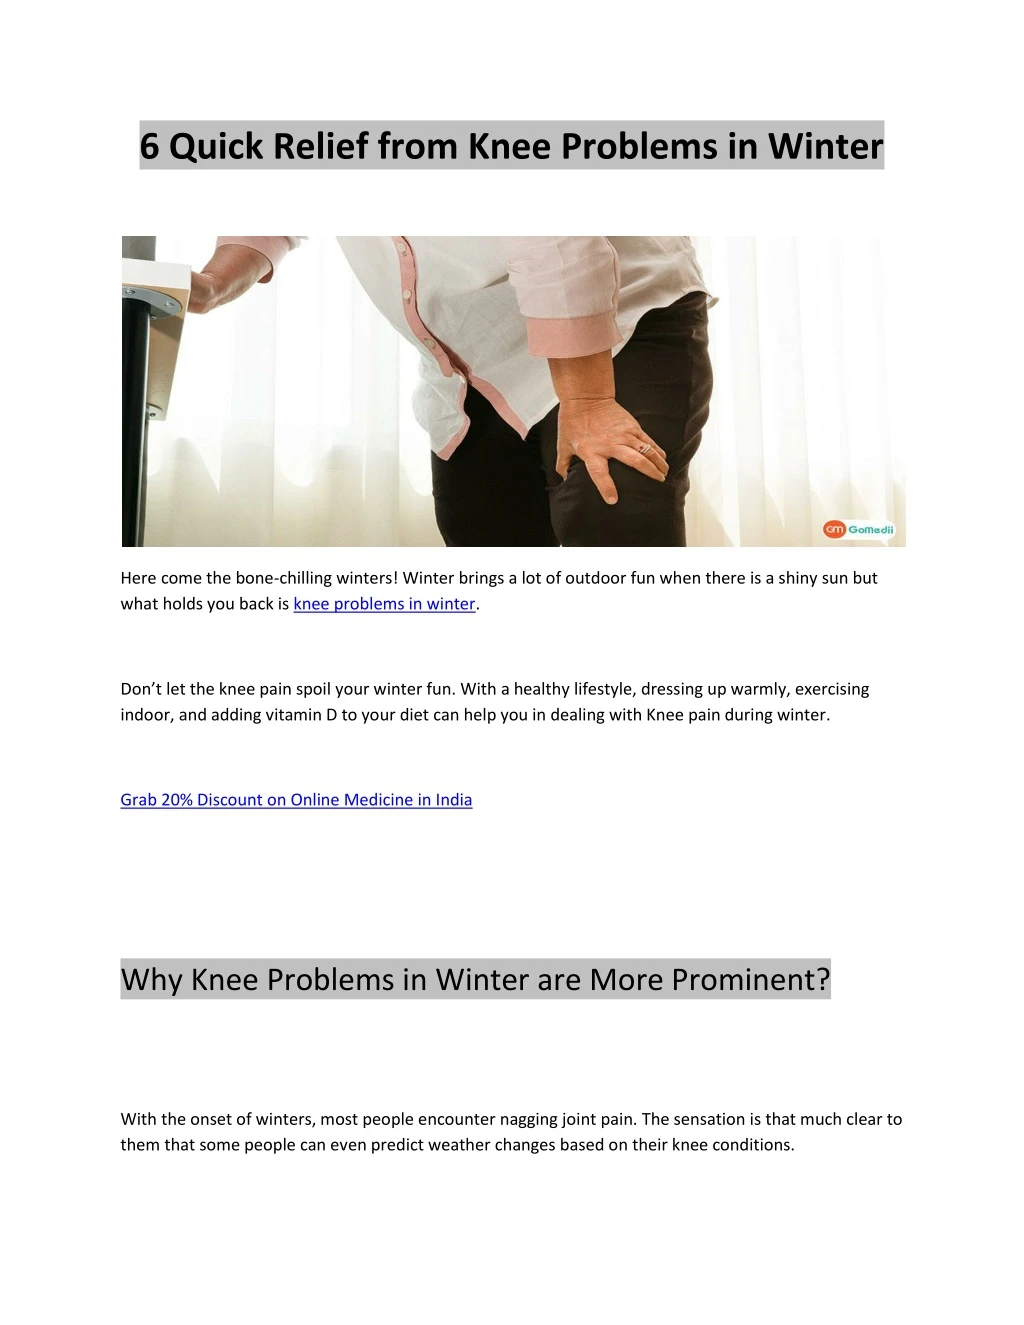 6 quick relief from knee problems in winter